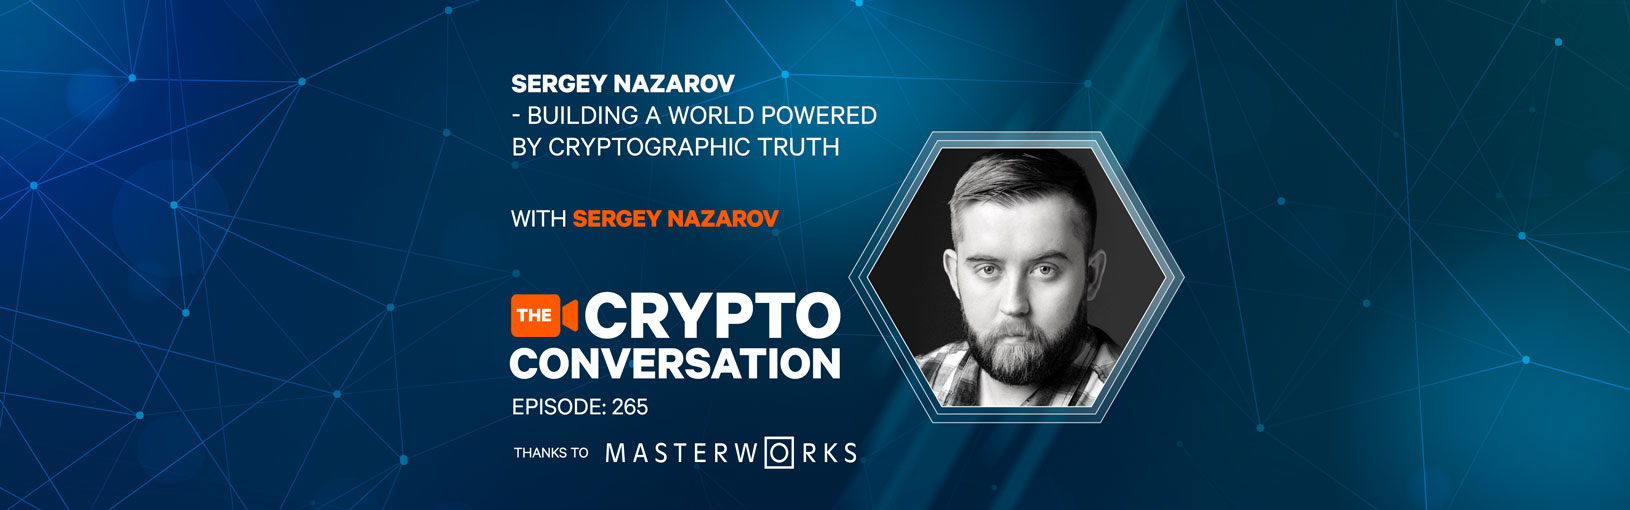 Sergey Nazarov – Building a world powered by cryptographic truth